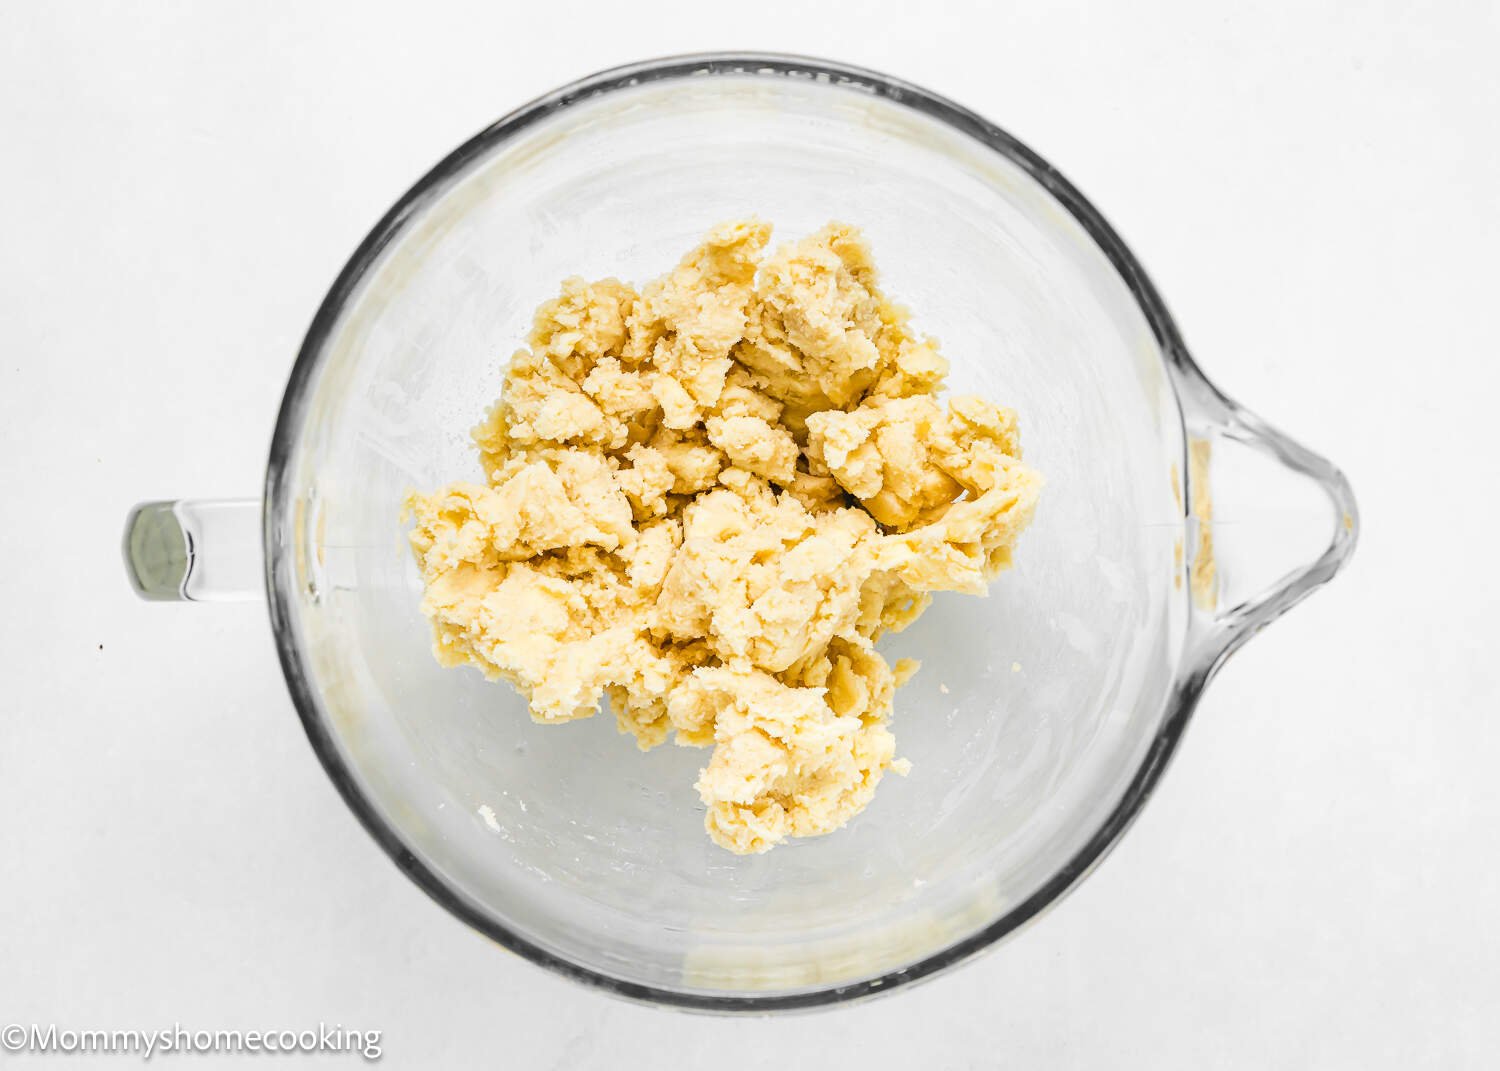 wet ingredients mixed together to make eggless Cookie dough.